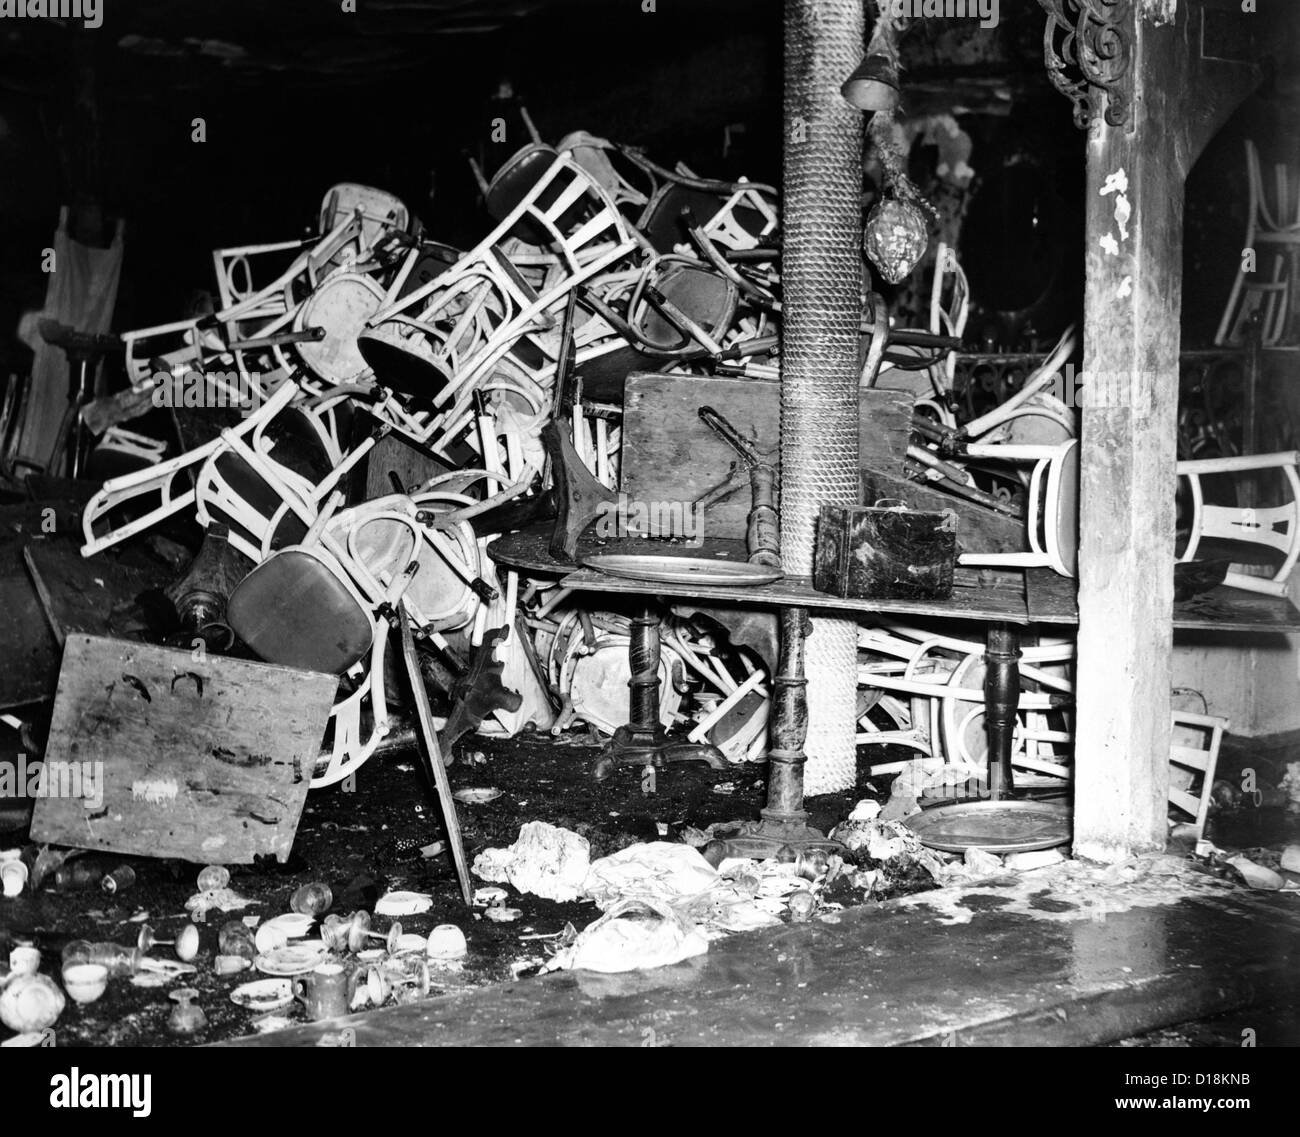 Coconut Grove Nightclub Fire. Charred tables and chairs, broken glass and other debris in the fire-ruined interior of the Stock Photo